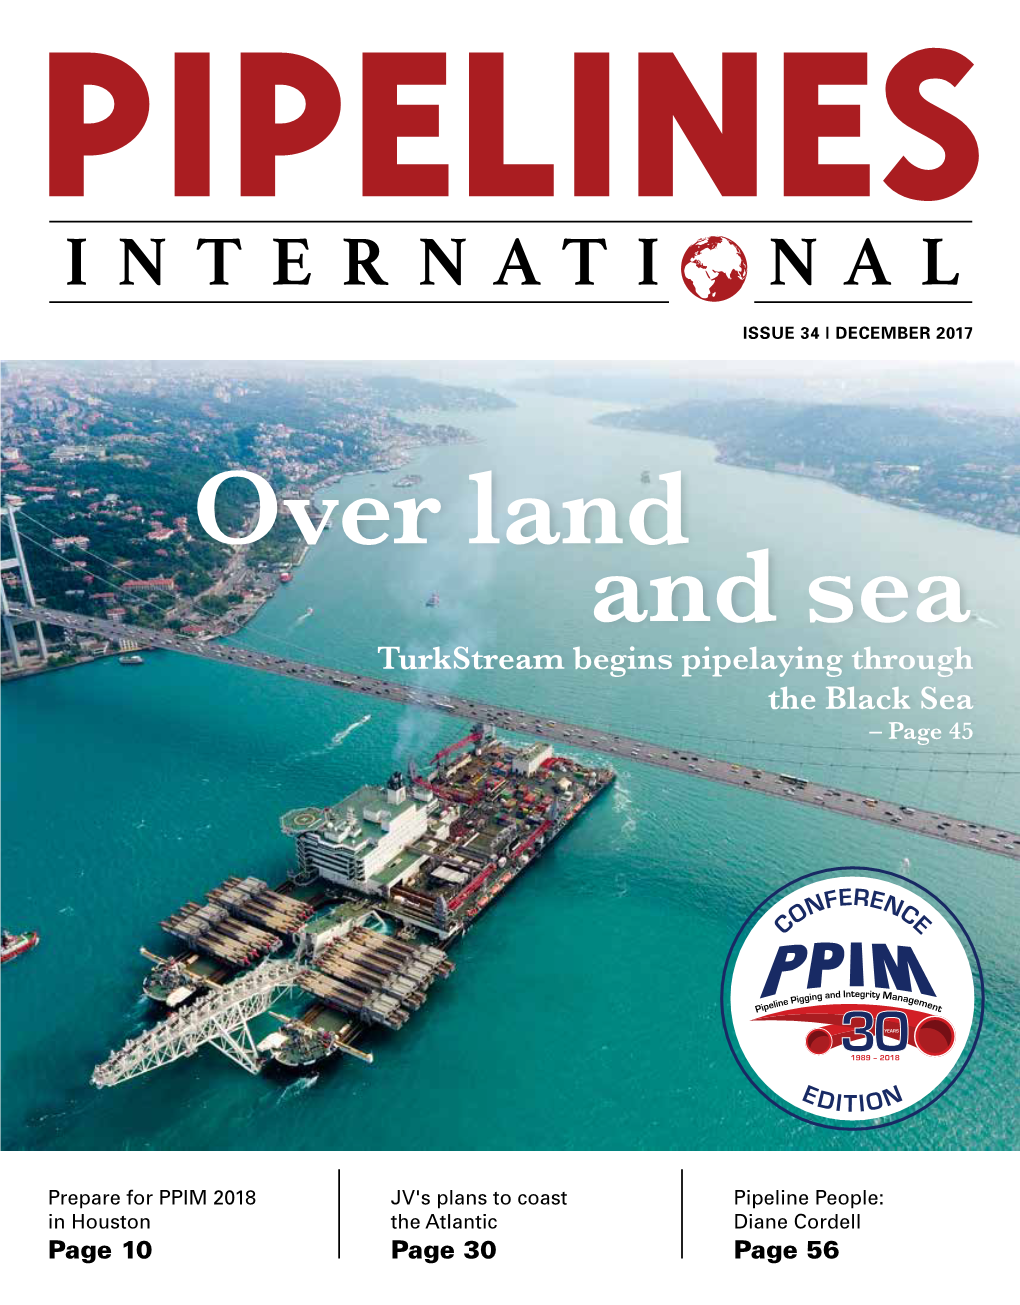 Over Land and Sea Turkstream Begins Pipelaying Through the Black Sea – Page 45